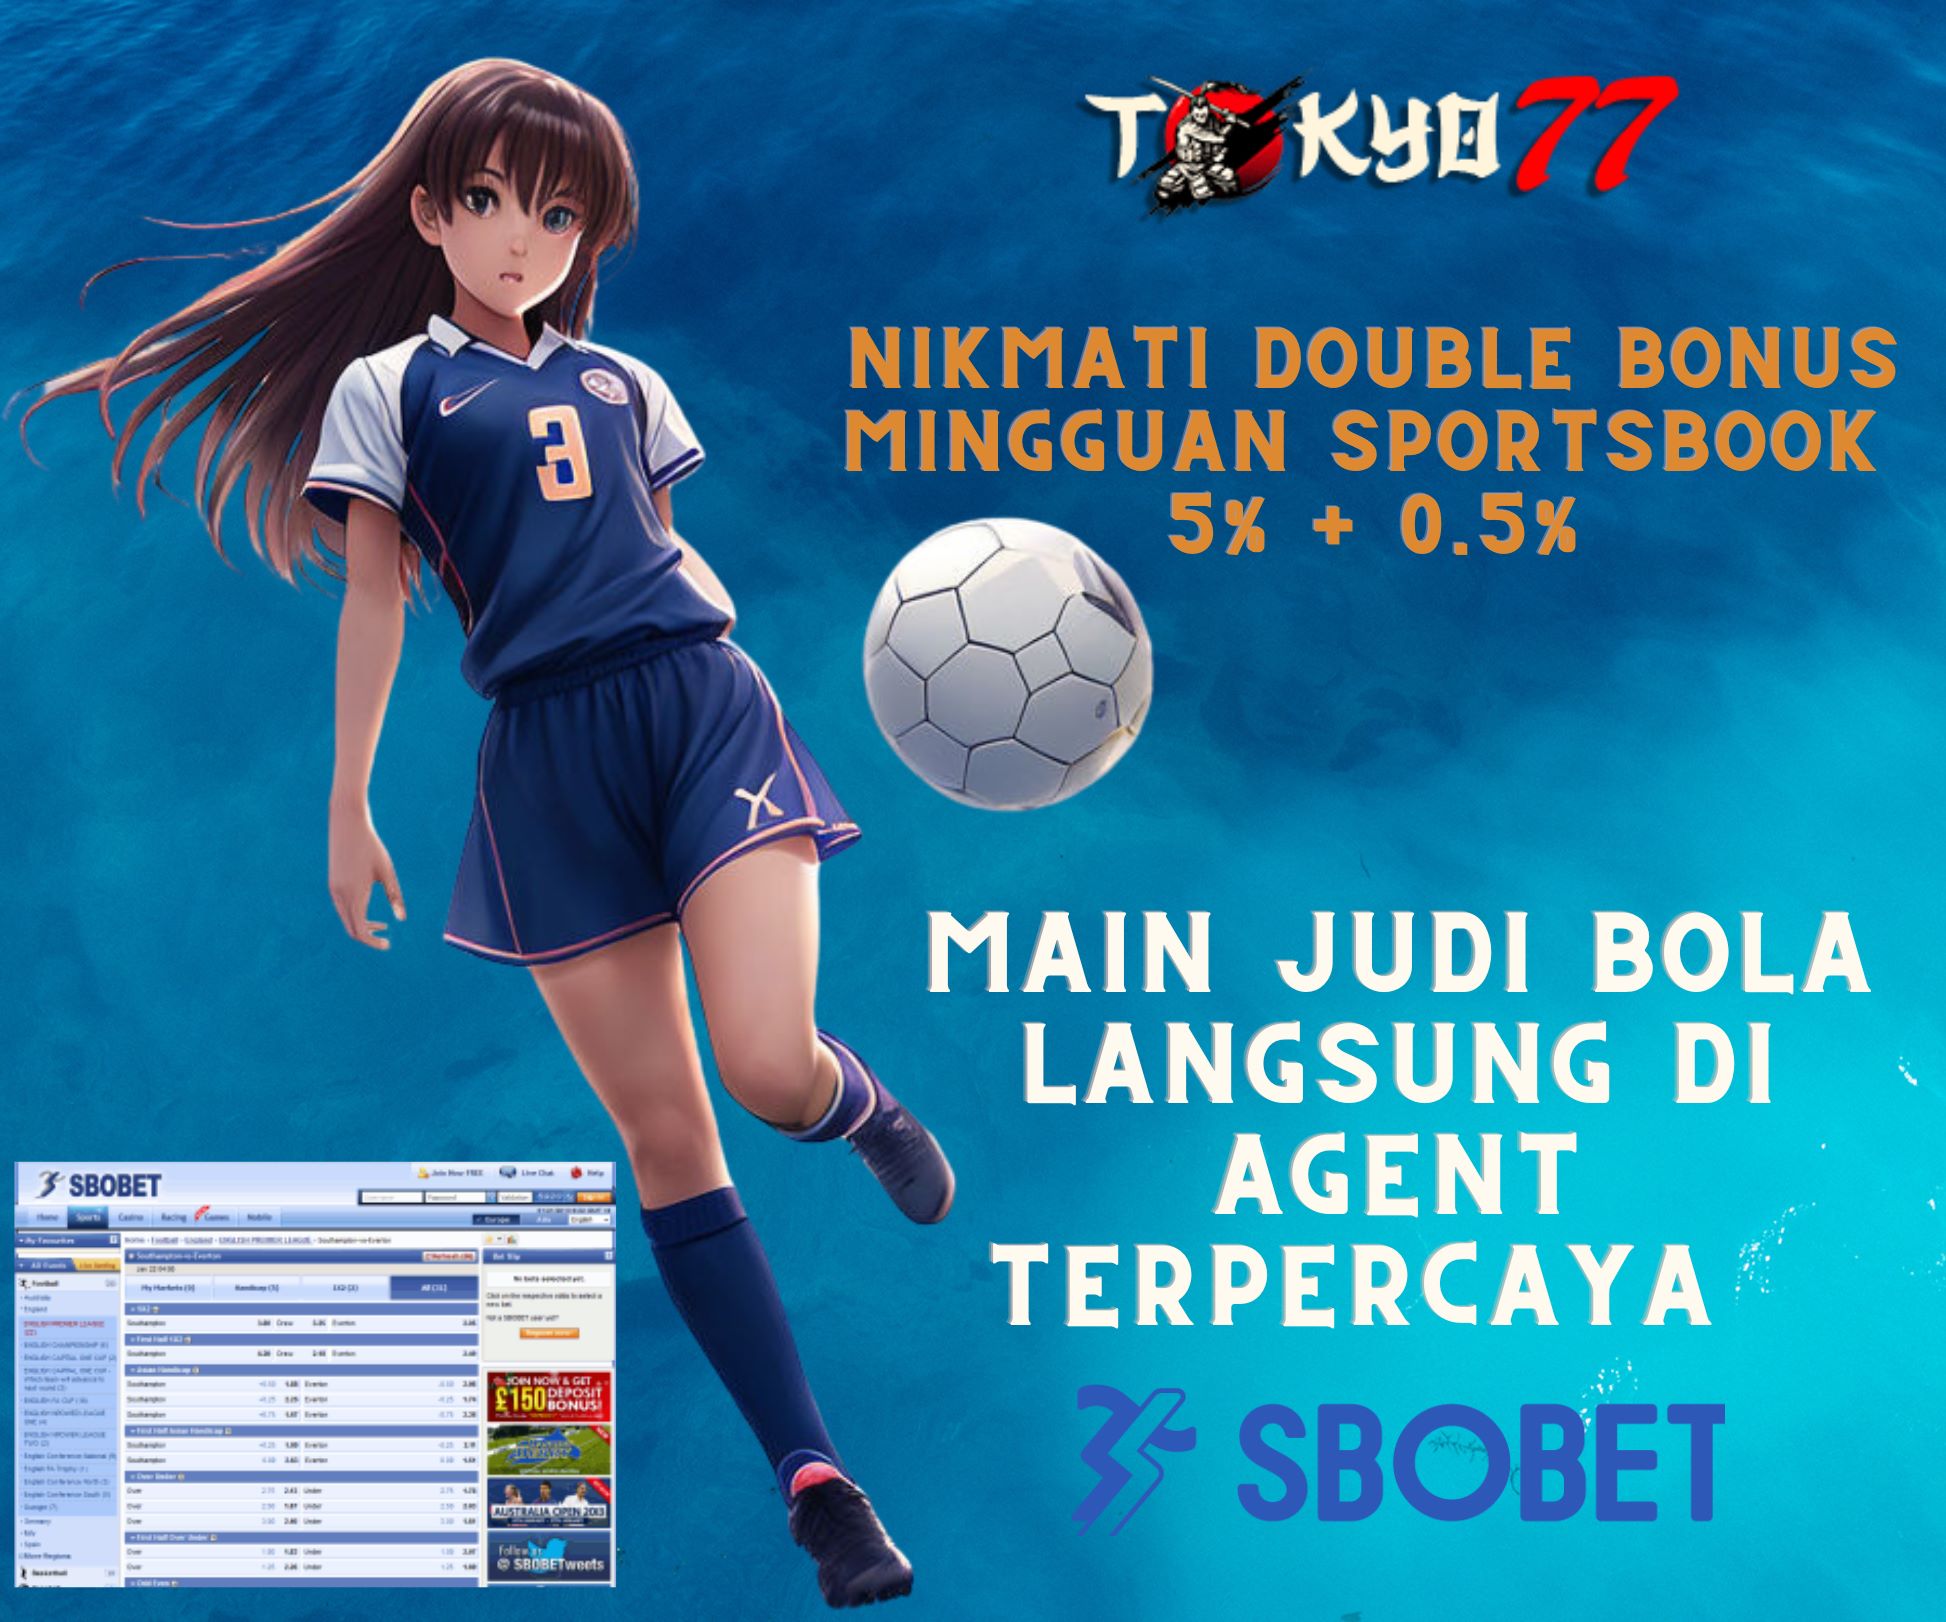 Playing Online Football Gambling is More Interesting on SBOBET